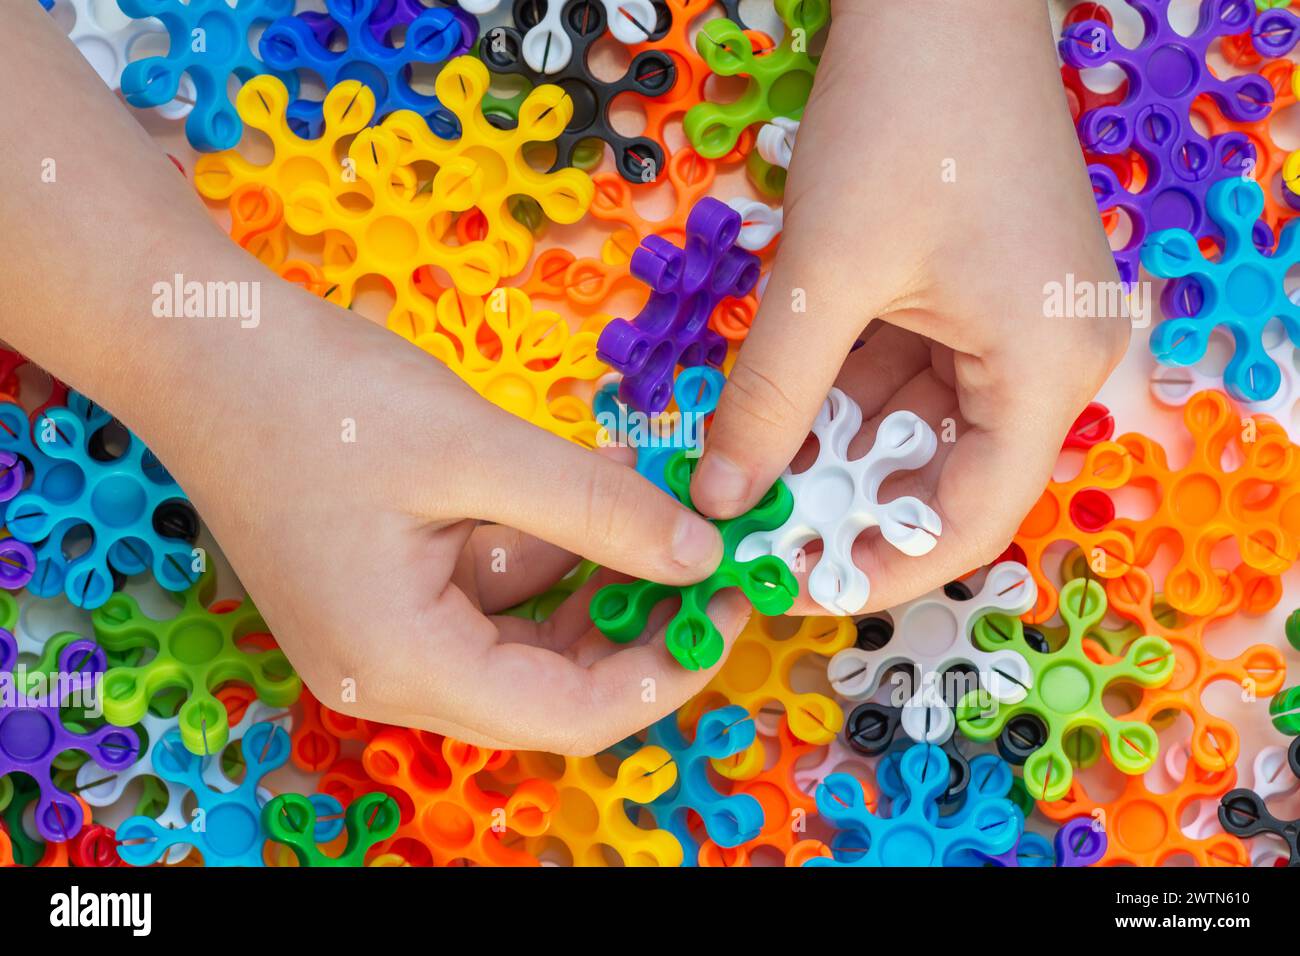 Kid hands playing with colorful connector toy. Educational activity concept with building blocks Stock Photo